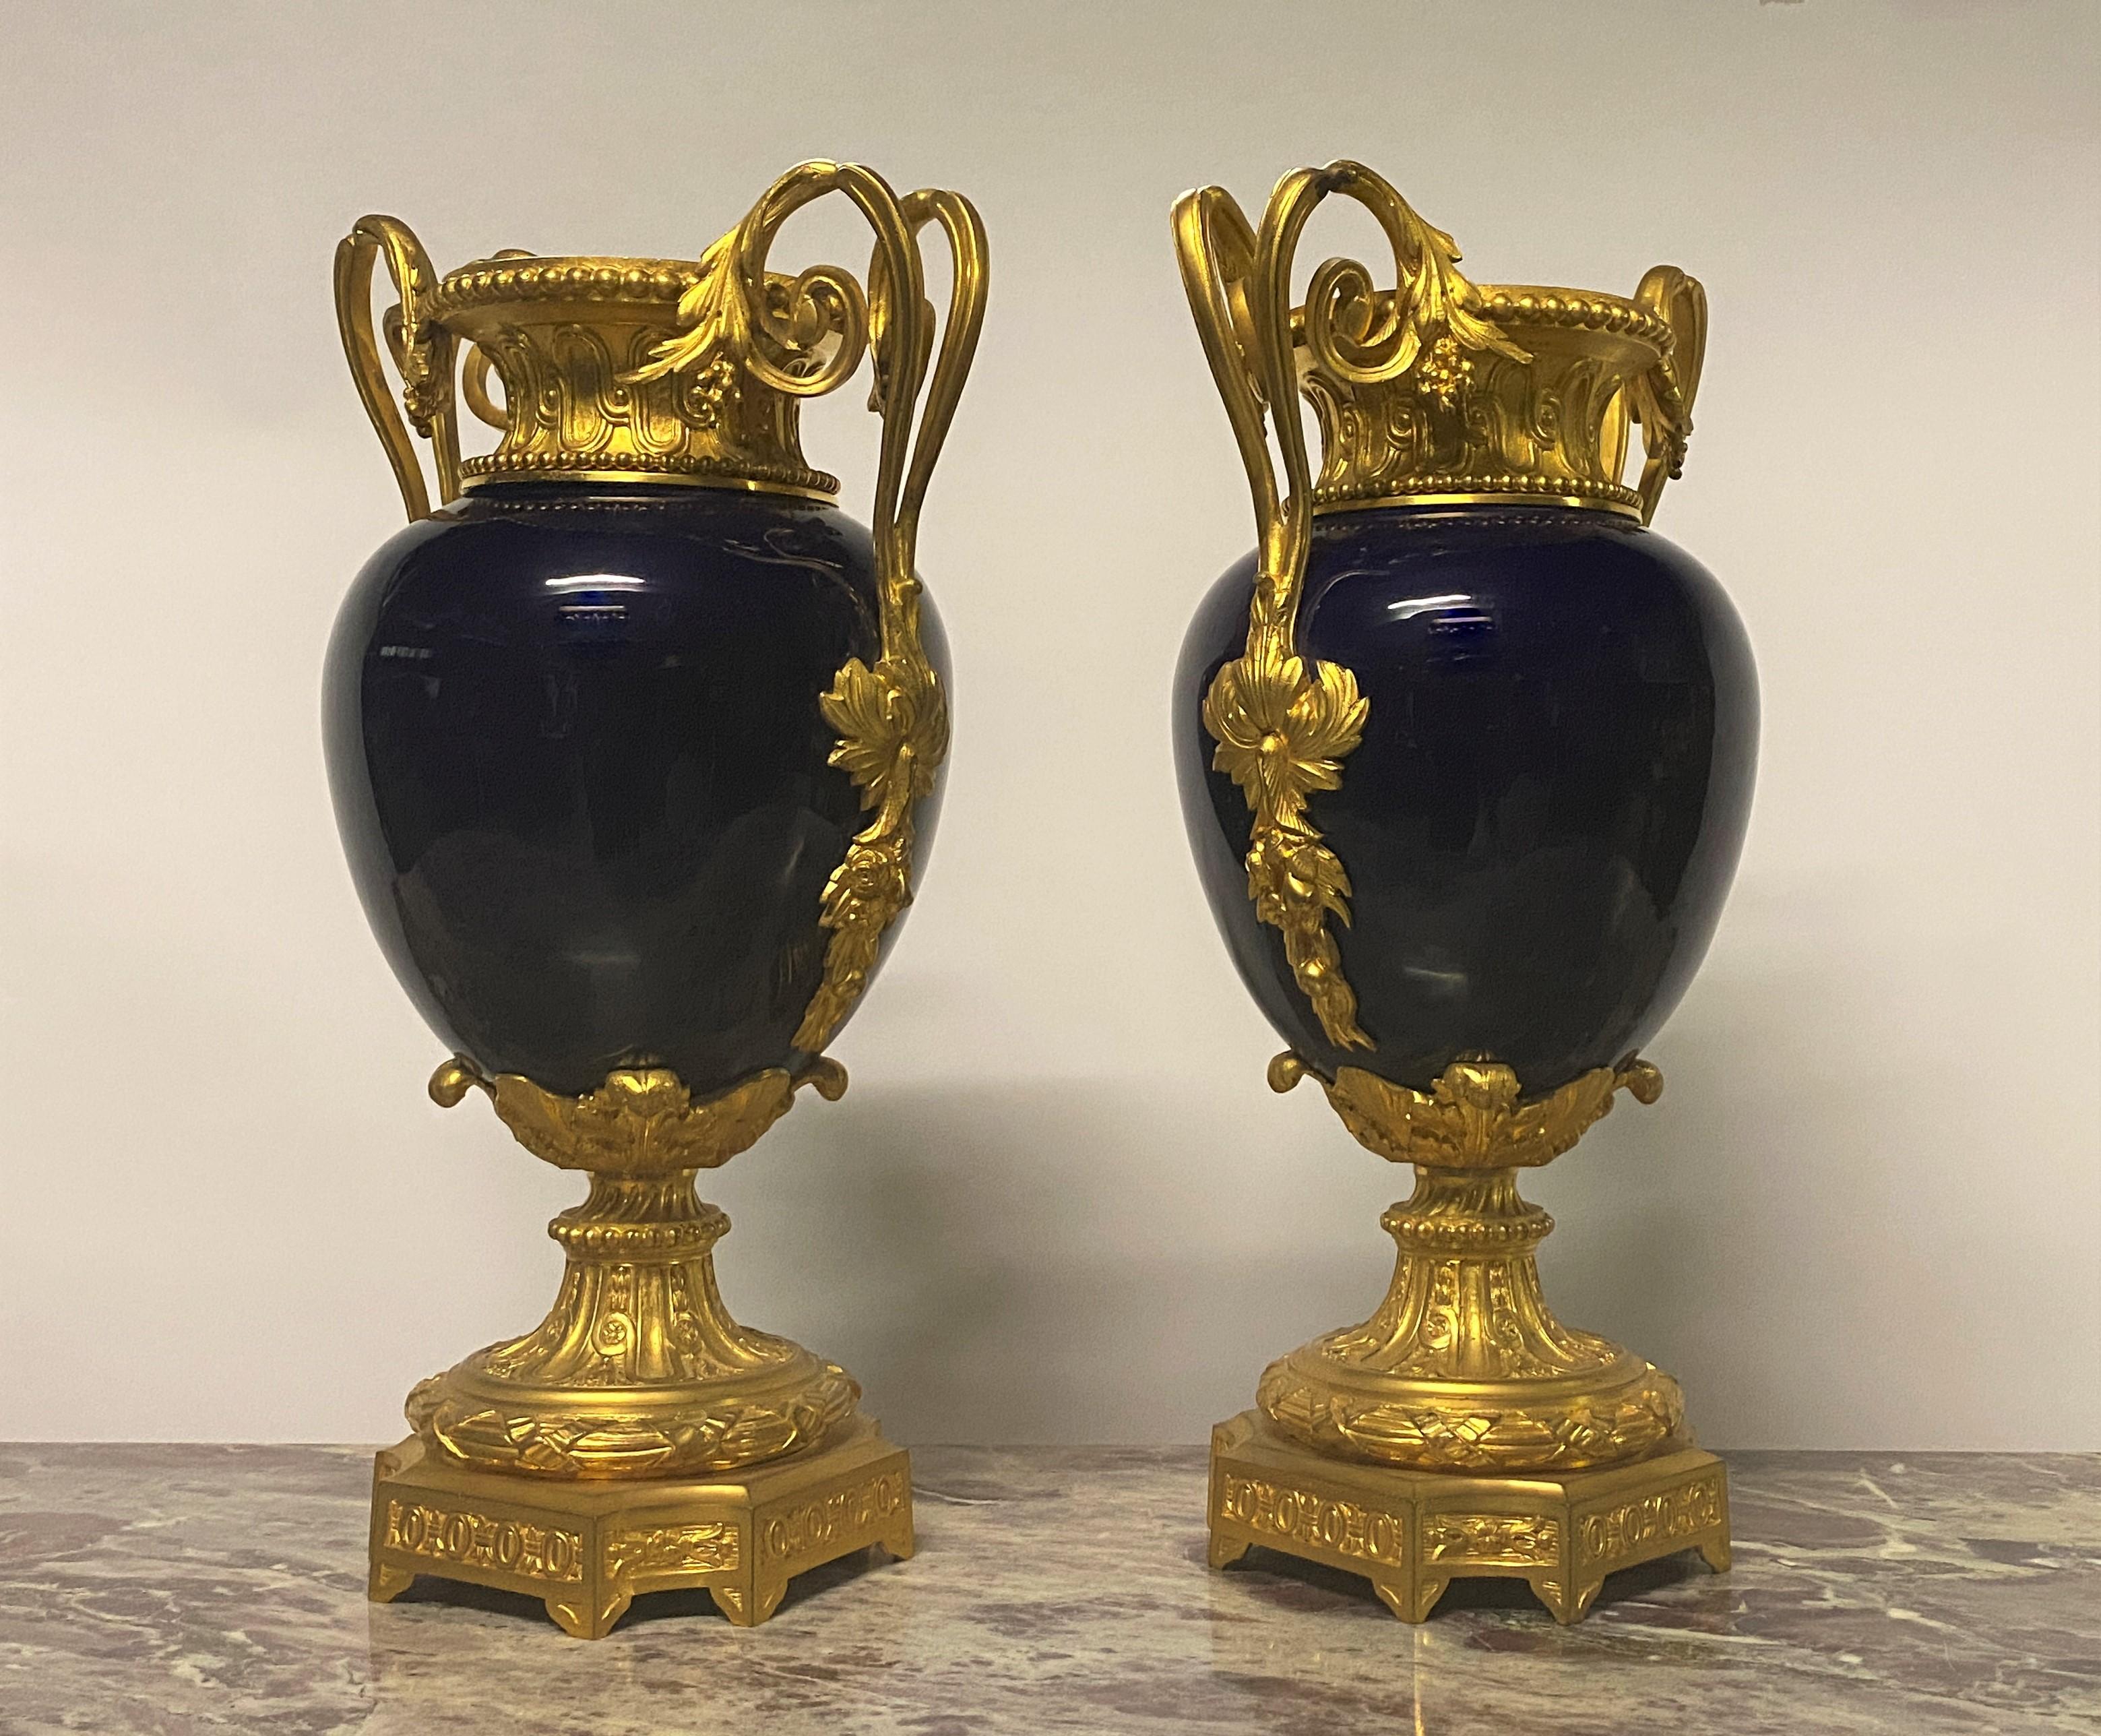 This pair of vases is very decorative and of good quality. The porcelain is deep blue enamelled, the frame is in gilded bronze of fine quality and a beautiful gilding very well matched with the blue of the baluster. These vases are also very